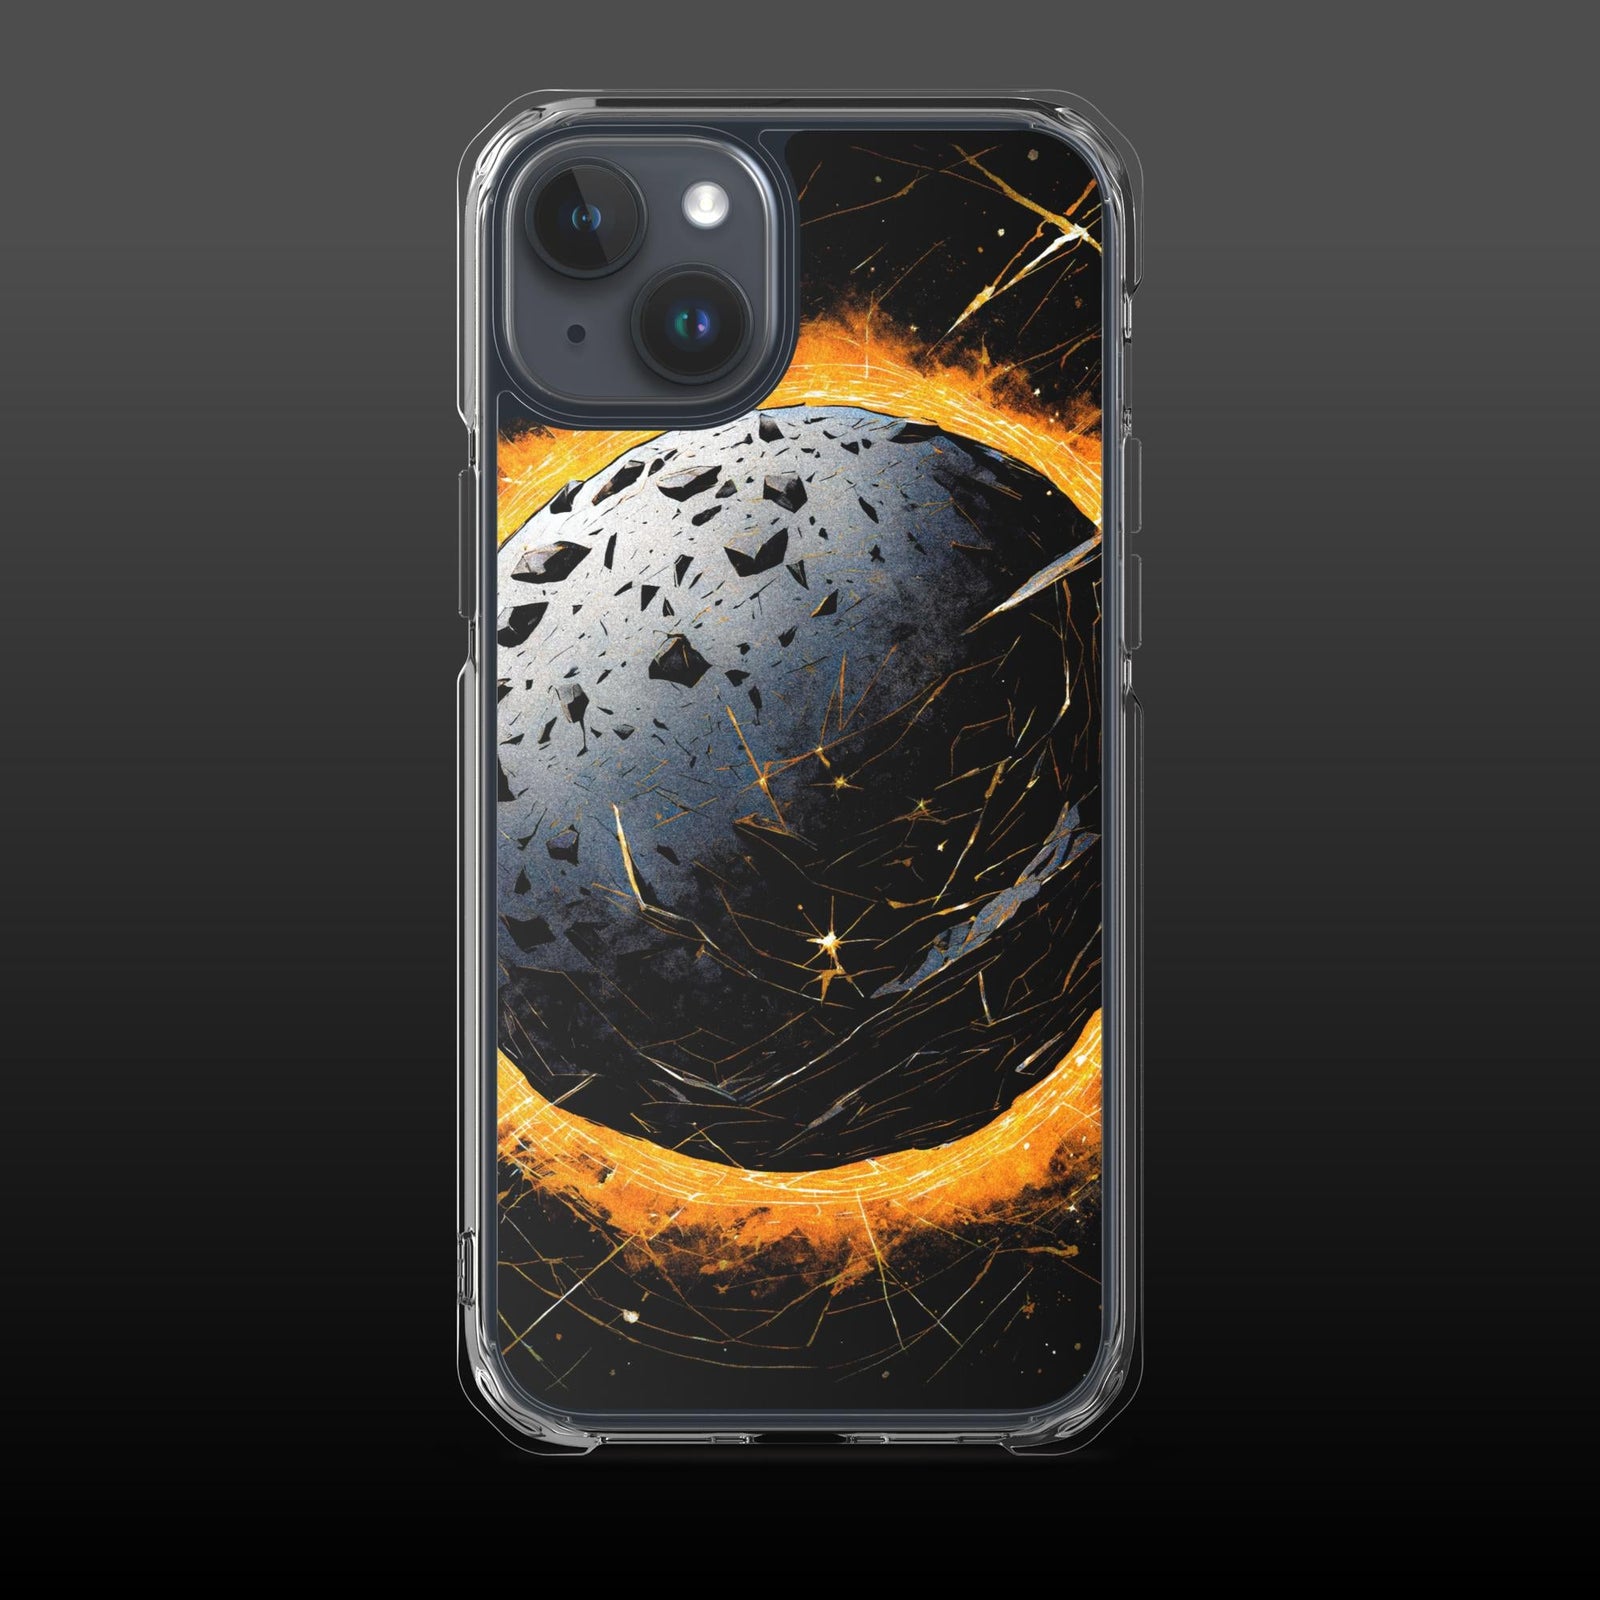 "Flaming meteor" clear iphone case - Clear iphone case - Ever colorful